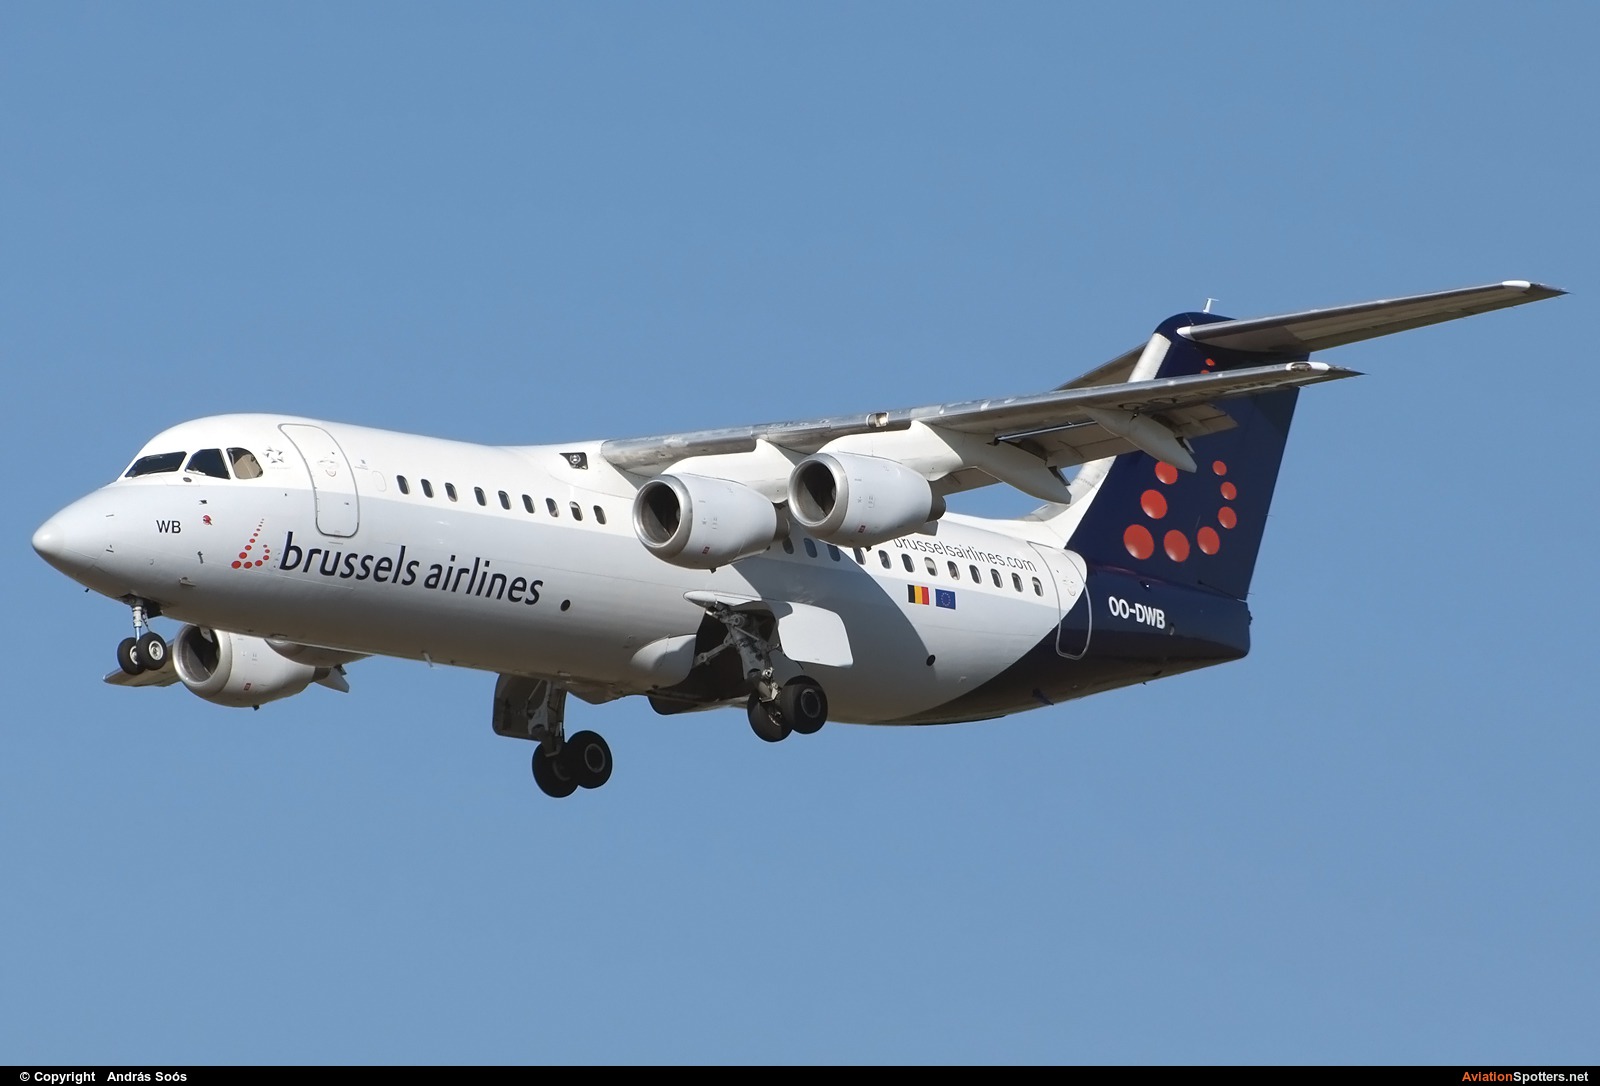 Brussels Airlines  -  BAe 146-300-Avro RJ100  (OO-DWB) By András Soós (sas1965)